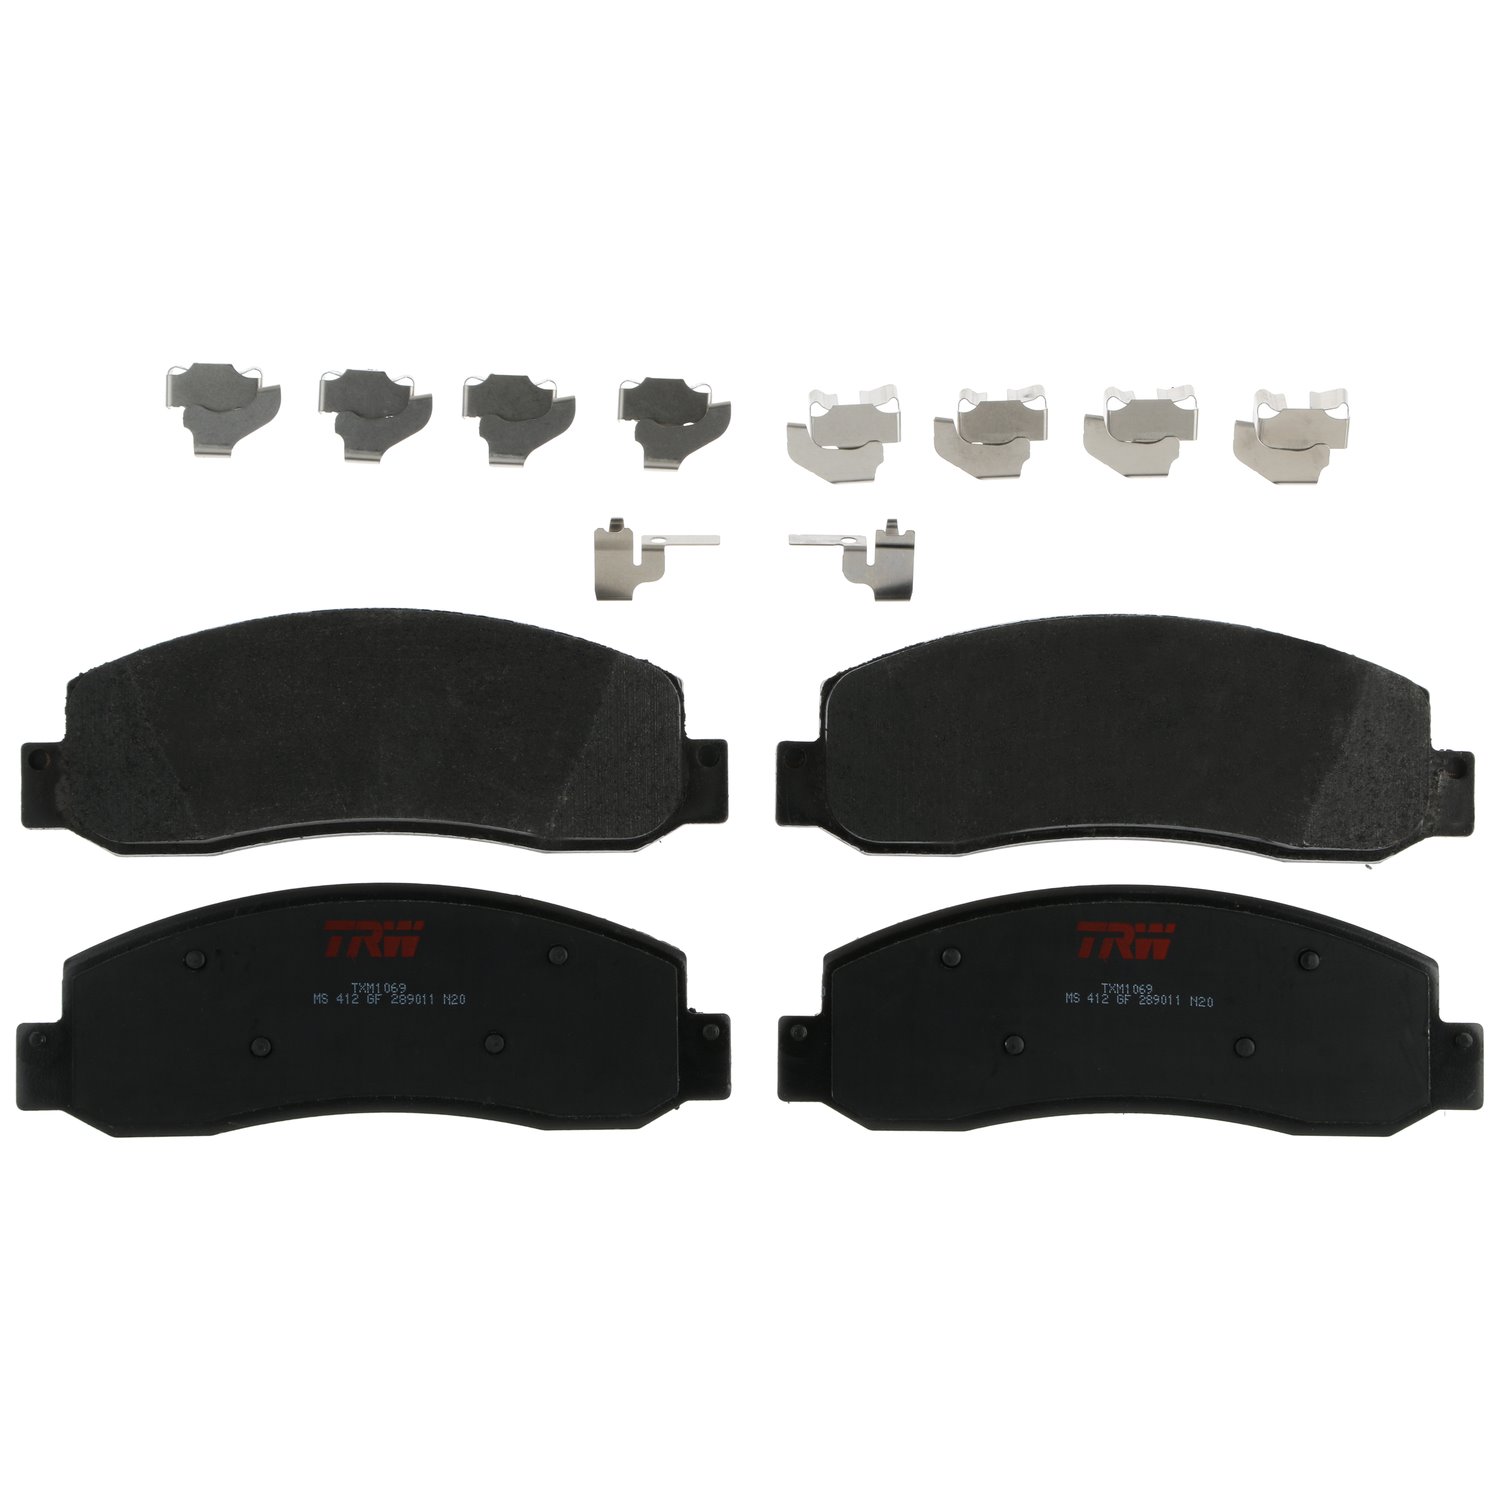 TXM1069 Ultra-Series Disc Brake Pad Set for Ford F-250 Super Duty 2007-2005, F-350 Super Duty 2007-2005, Position: Front